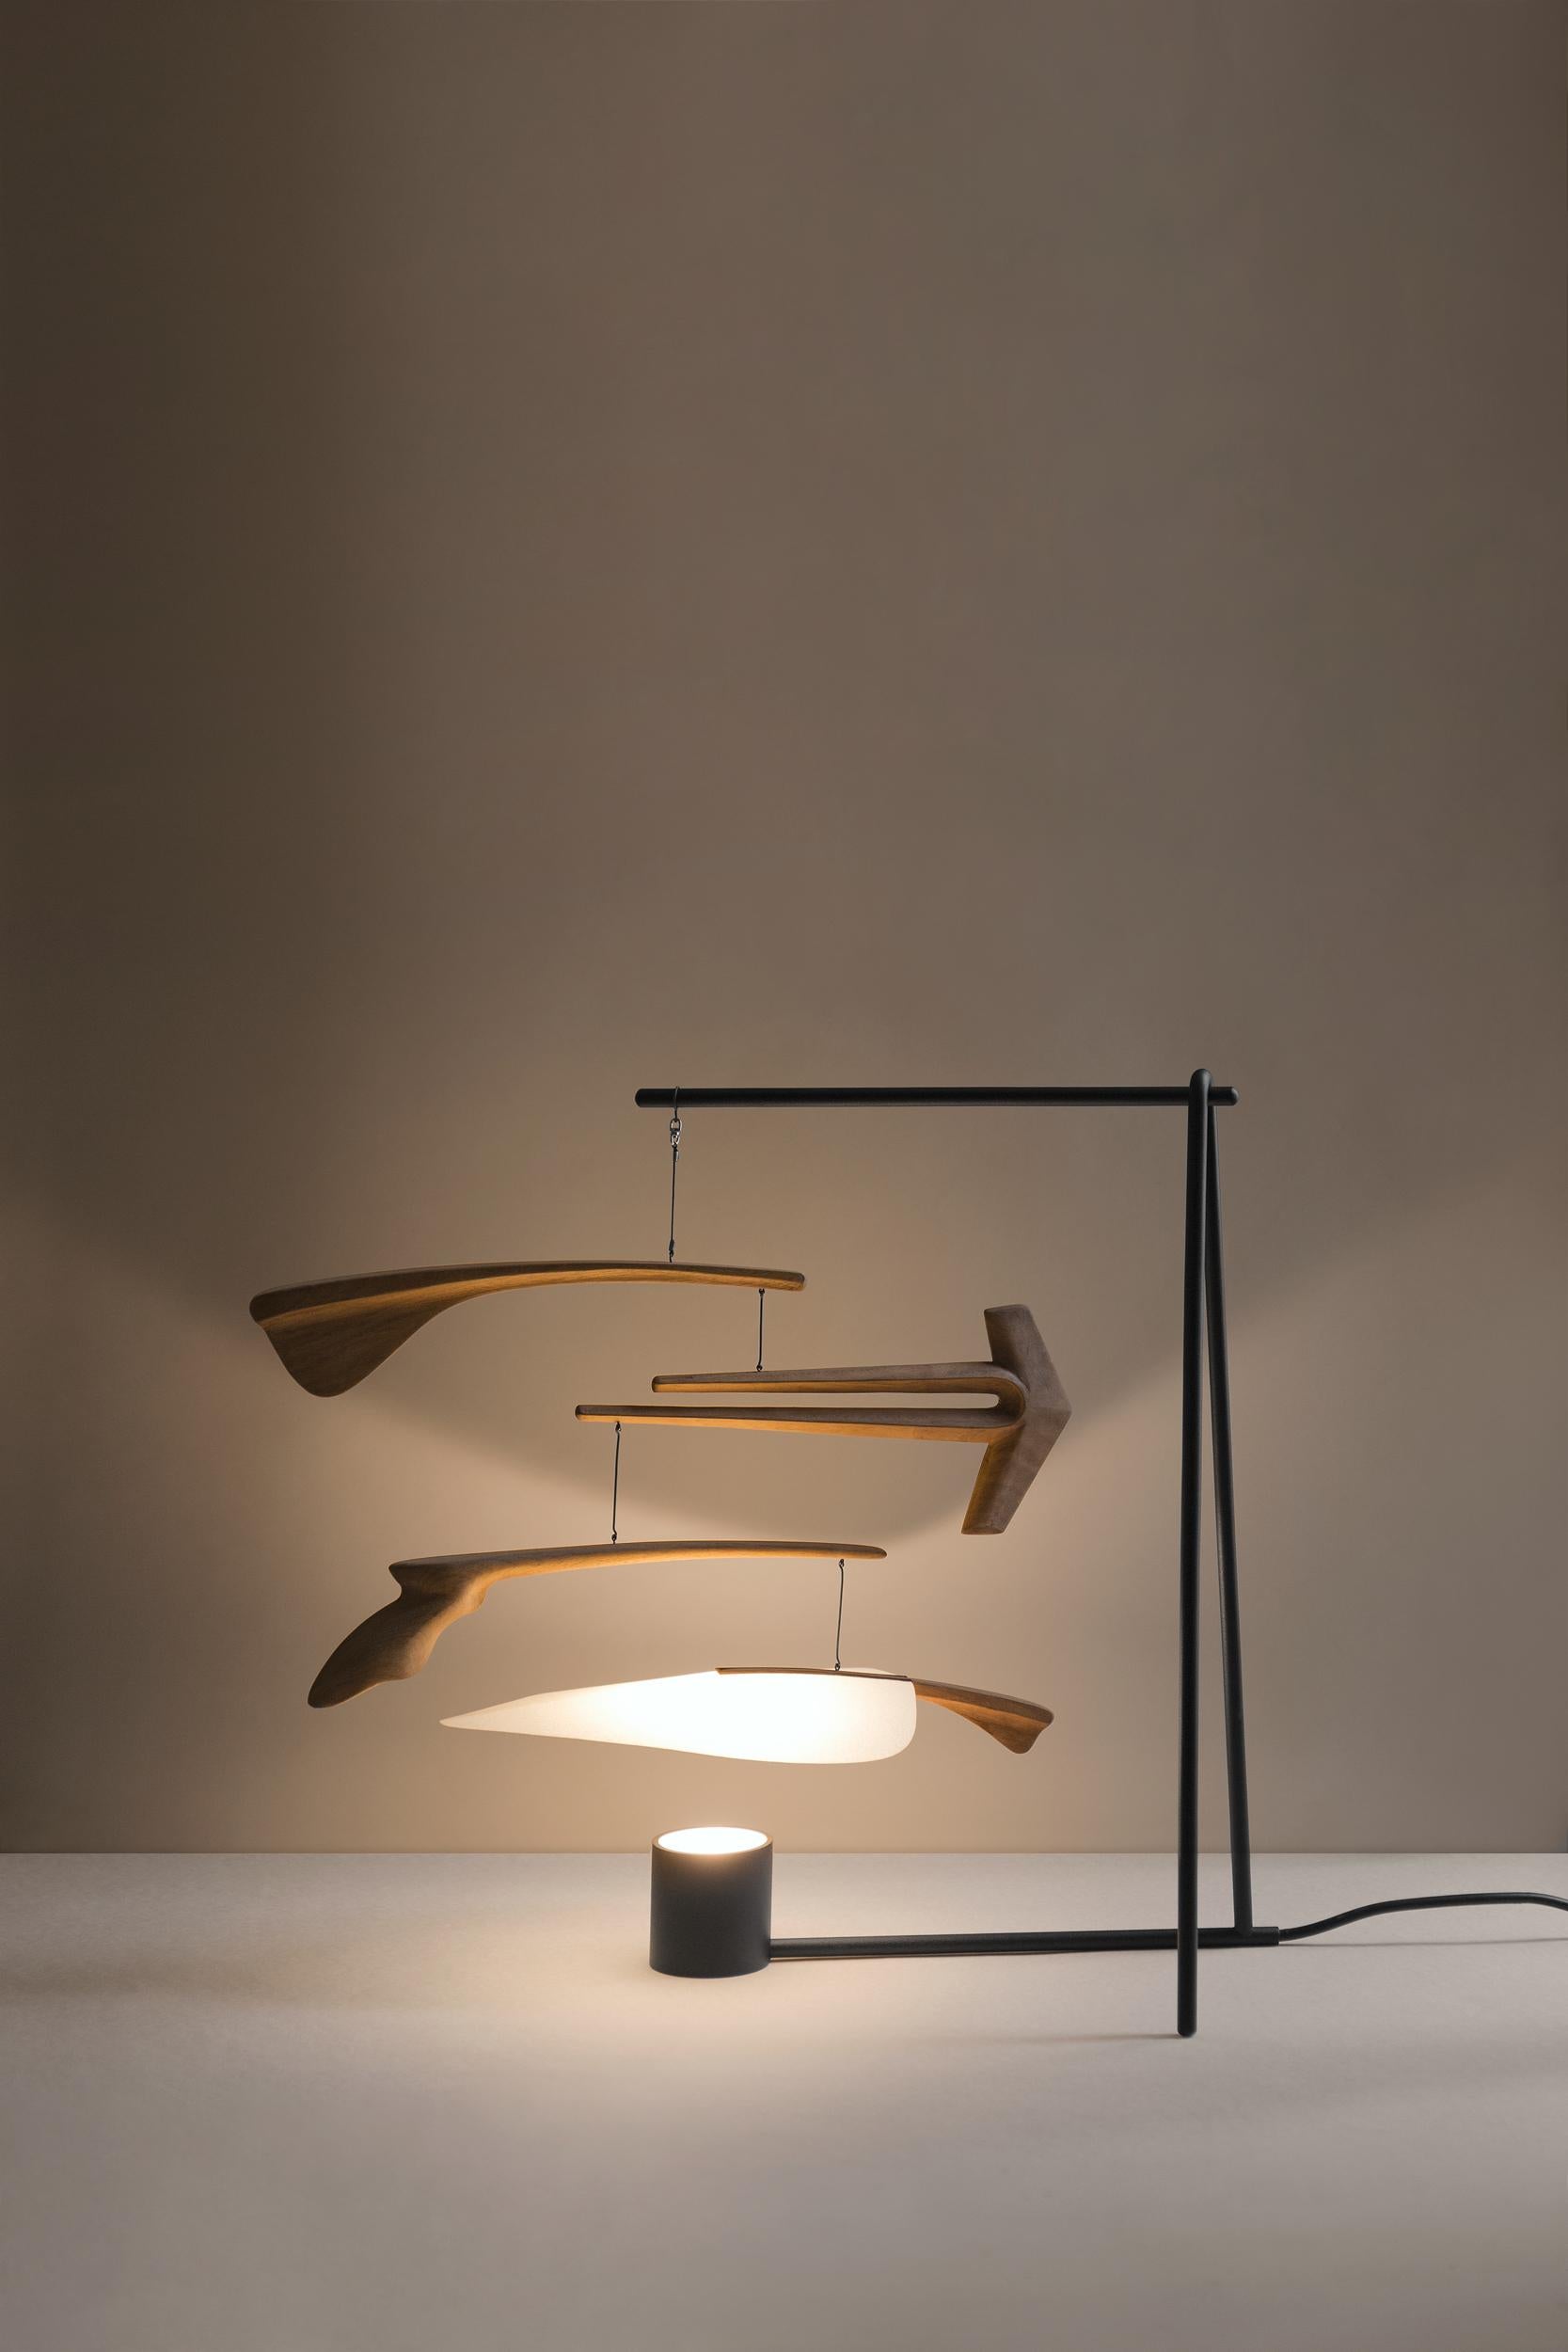 Natural Óseo - Mobile lamp by Federico Stefanovich.
Dimensions: 45 x 47 x H 45 cm.
Material: Solid inked oak wood with a high solid oil finish. Screens made of nitrocellulose coated paper. Structure made of powder coated steel.
Also available in